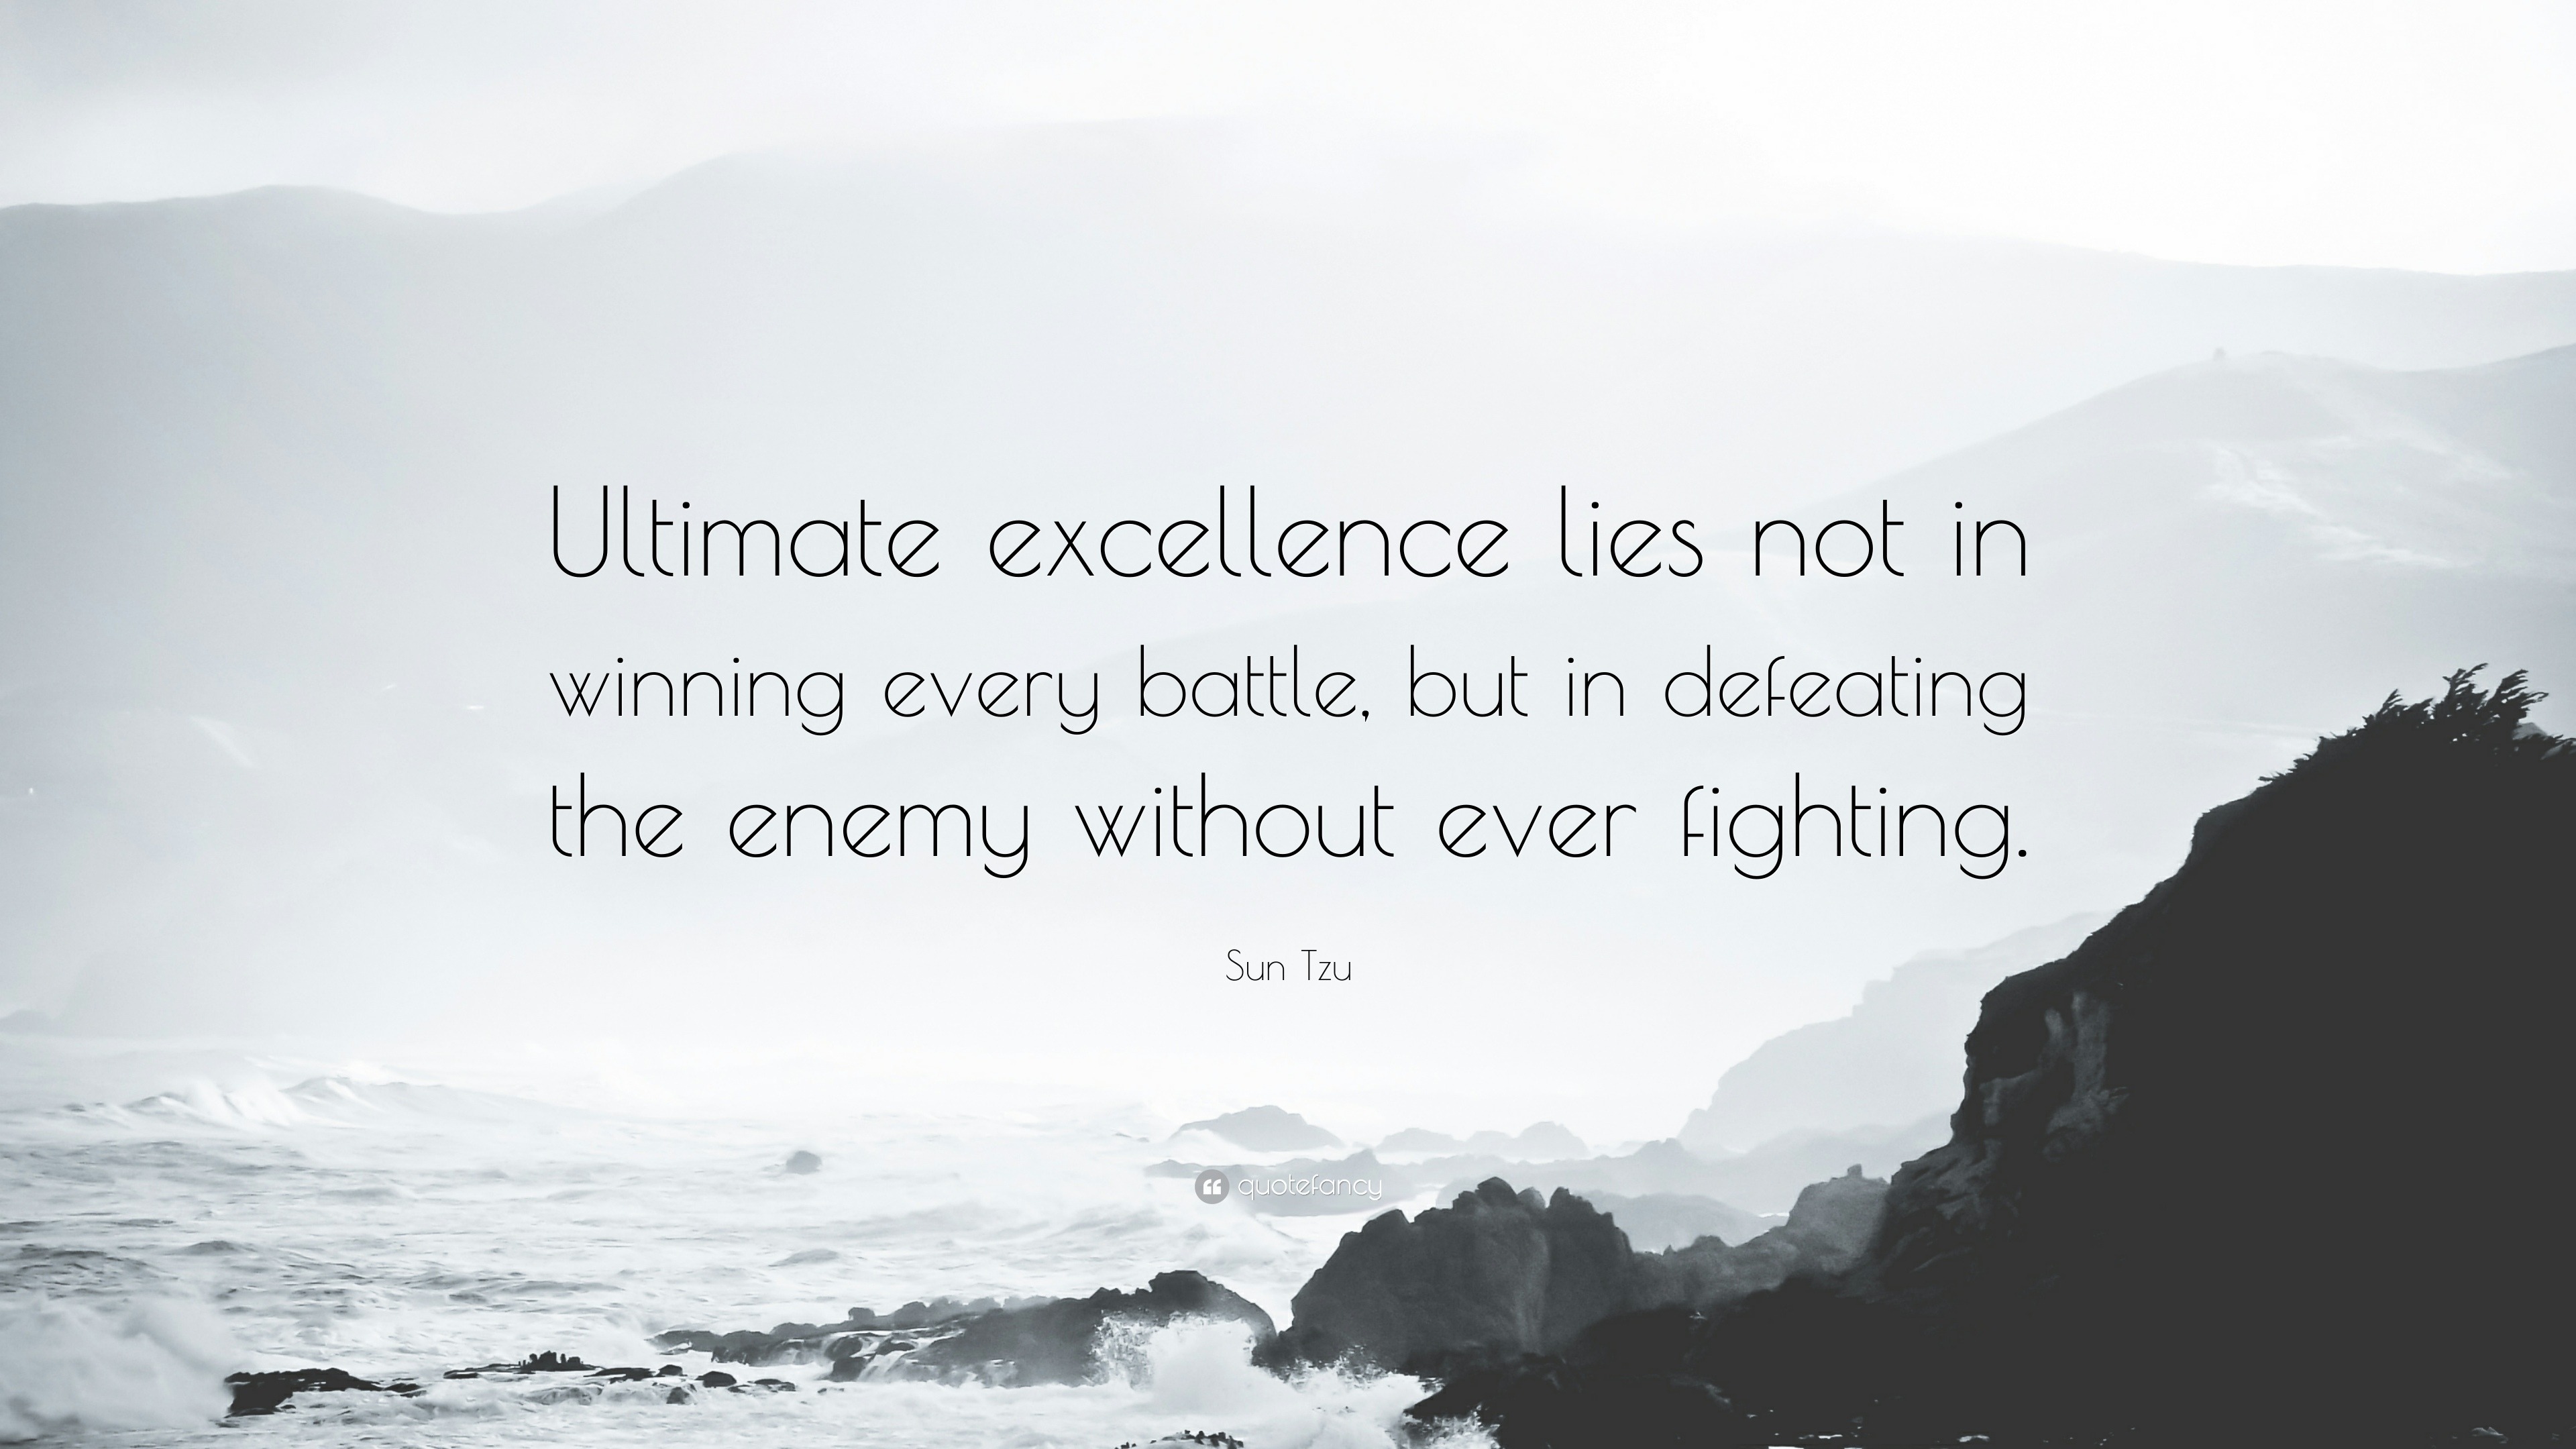 Sun Tzu Quote “Ultimate excellence lies not in winning